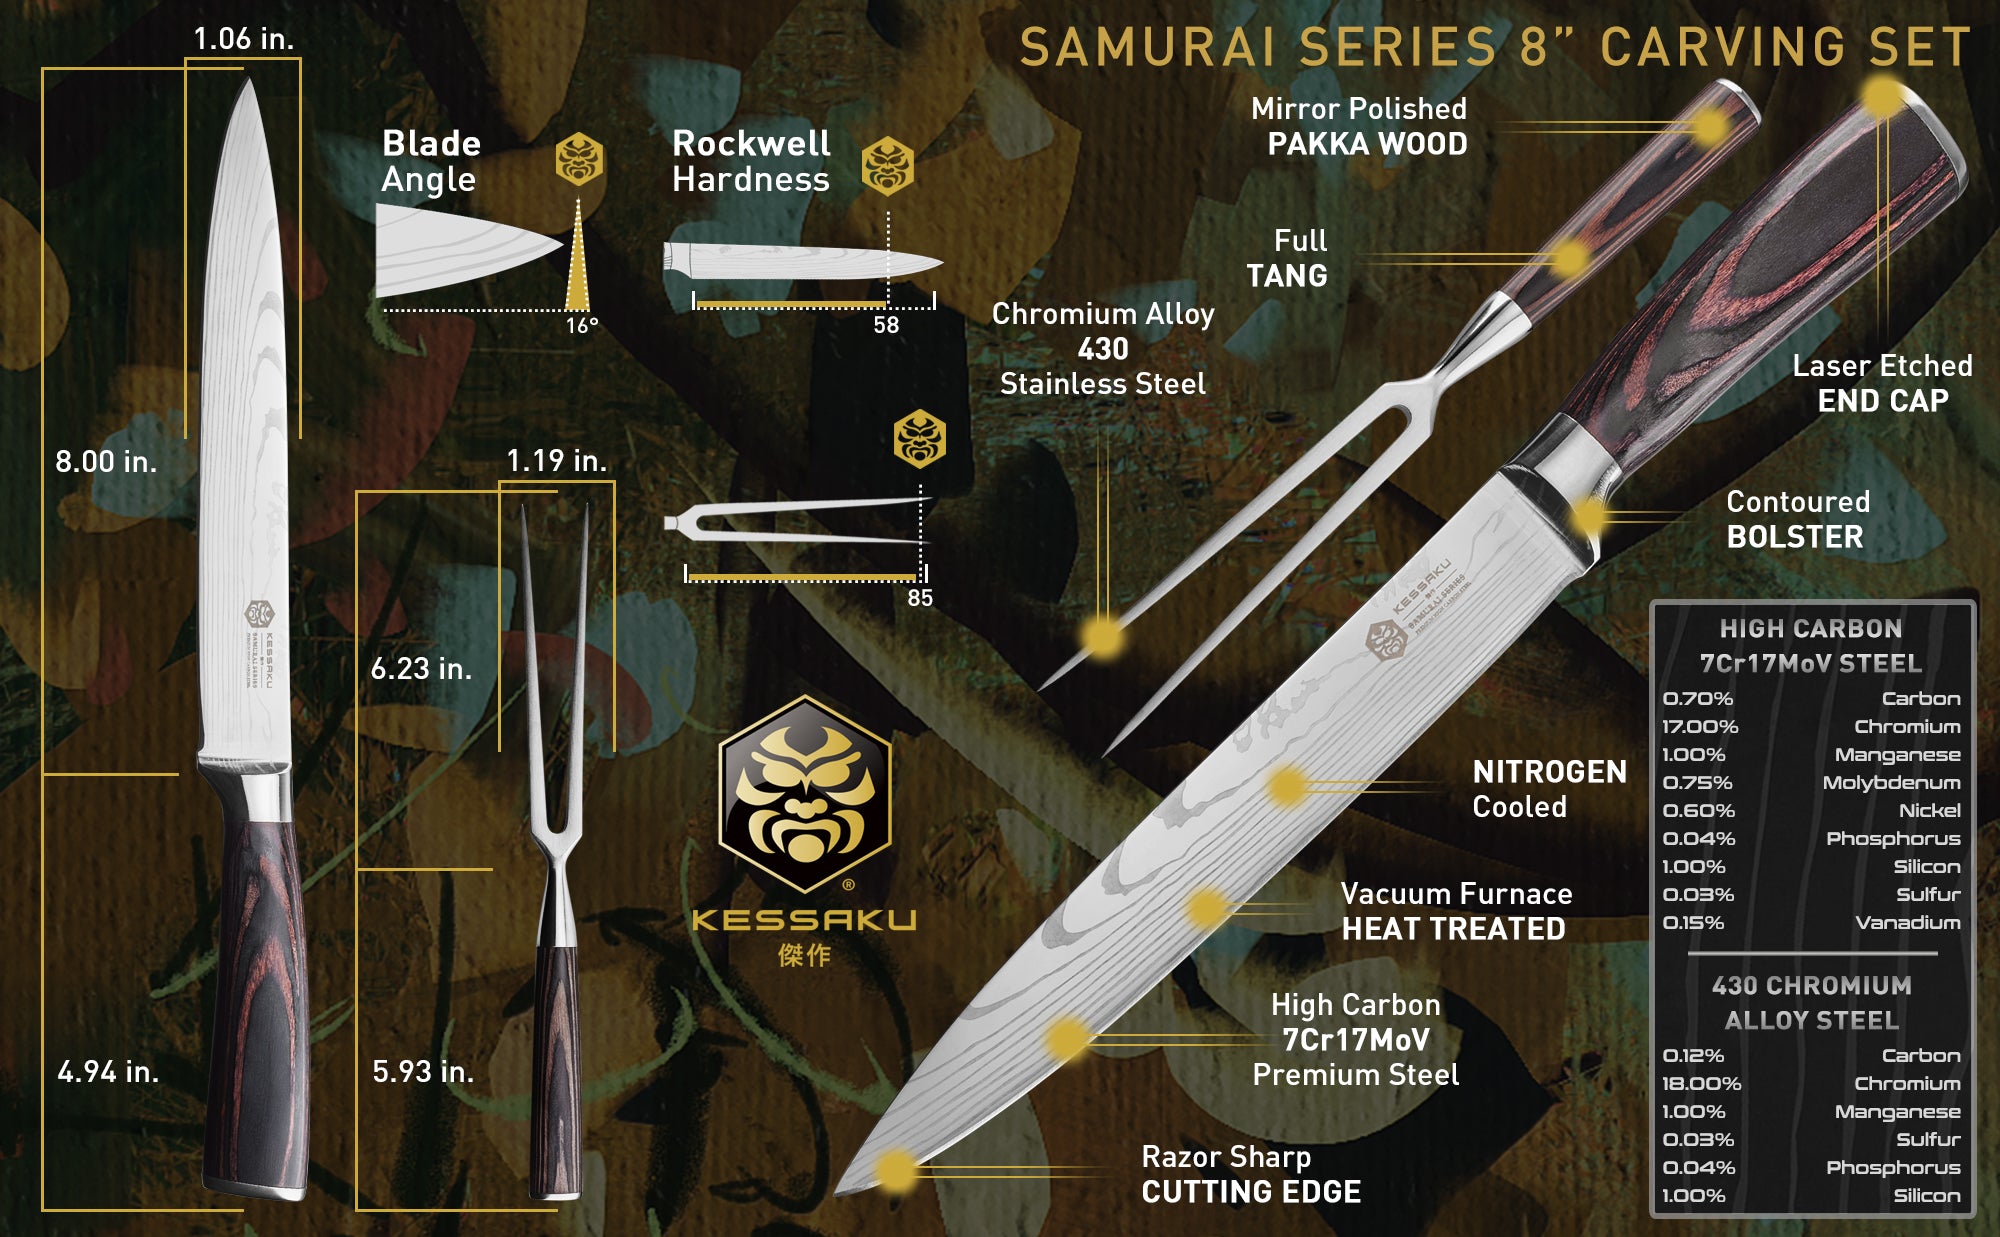 The Kessaku Samurai Series 8-Inch Carving Knife and 6-Inch Carving Fork Set's features, dimensions, and steel composition